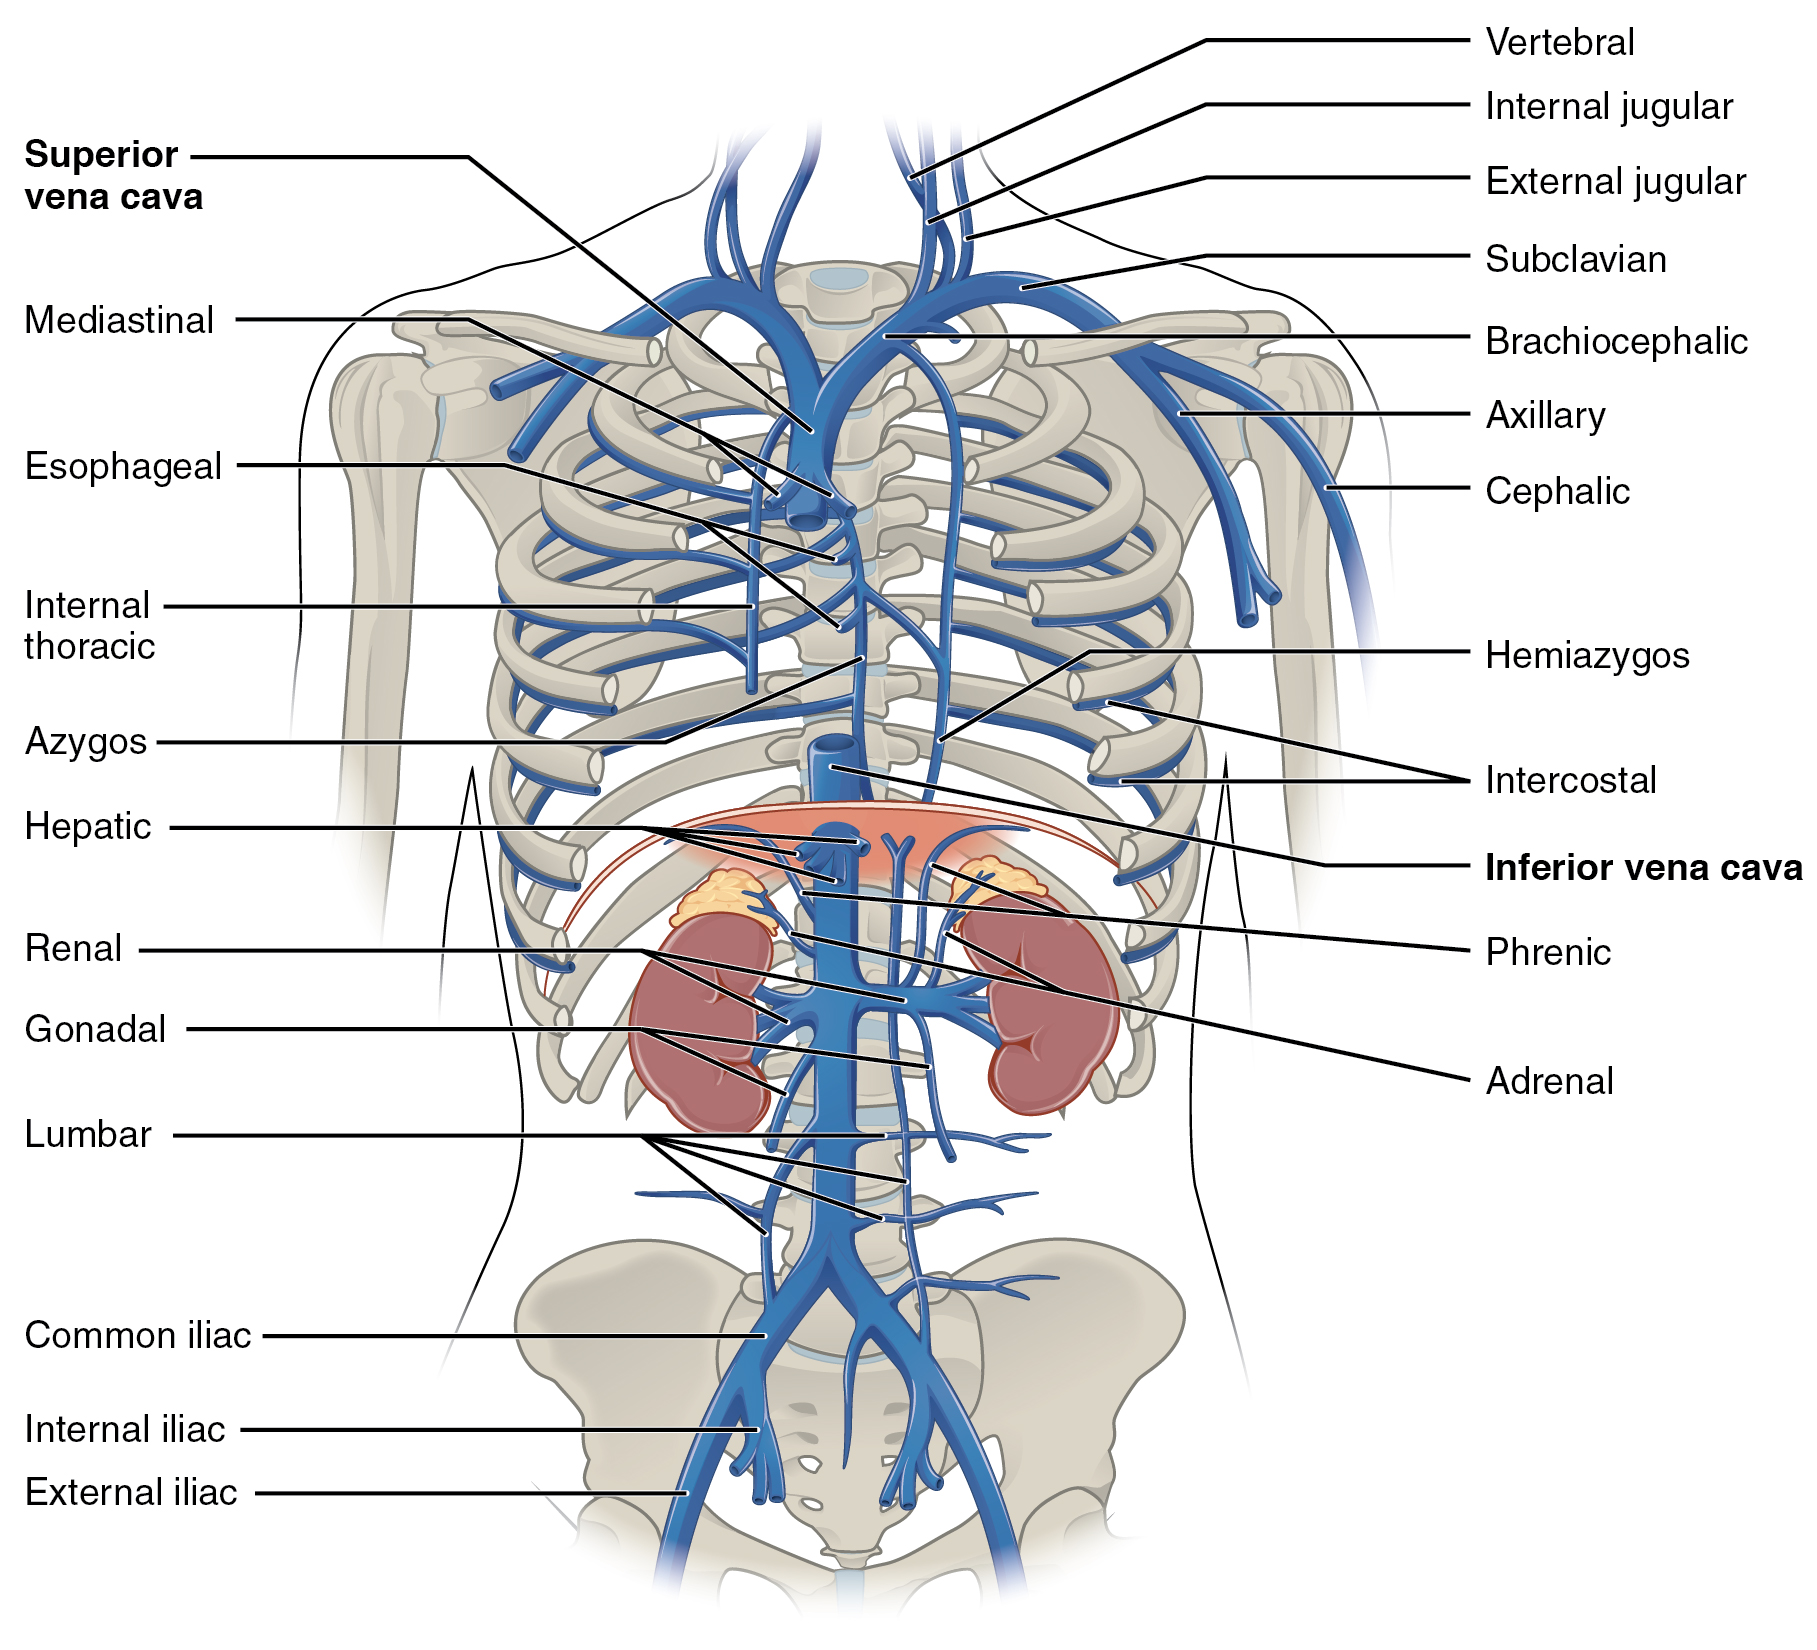 Major Veins of Thoracic and Abdominal Regions